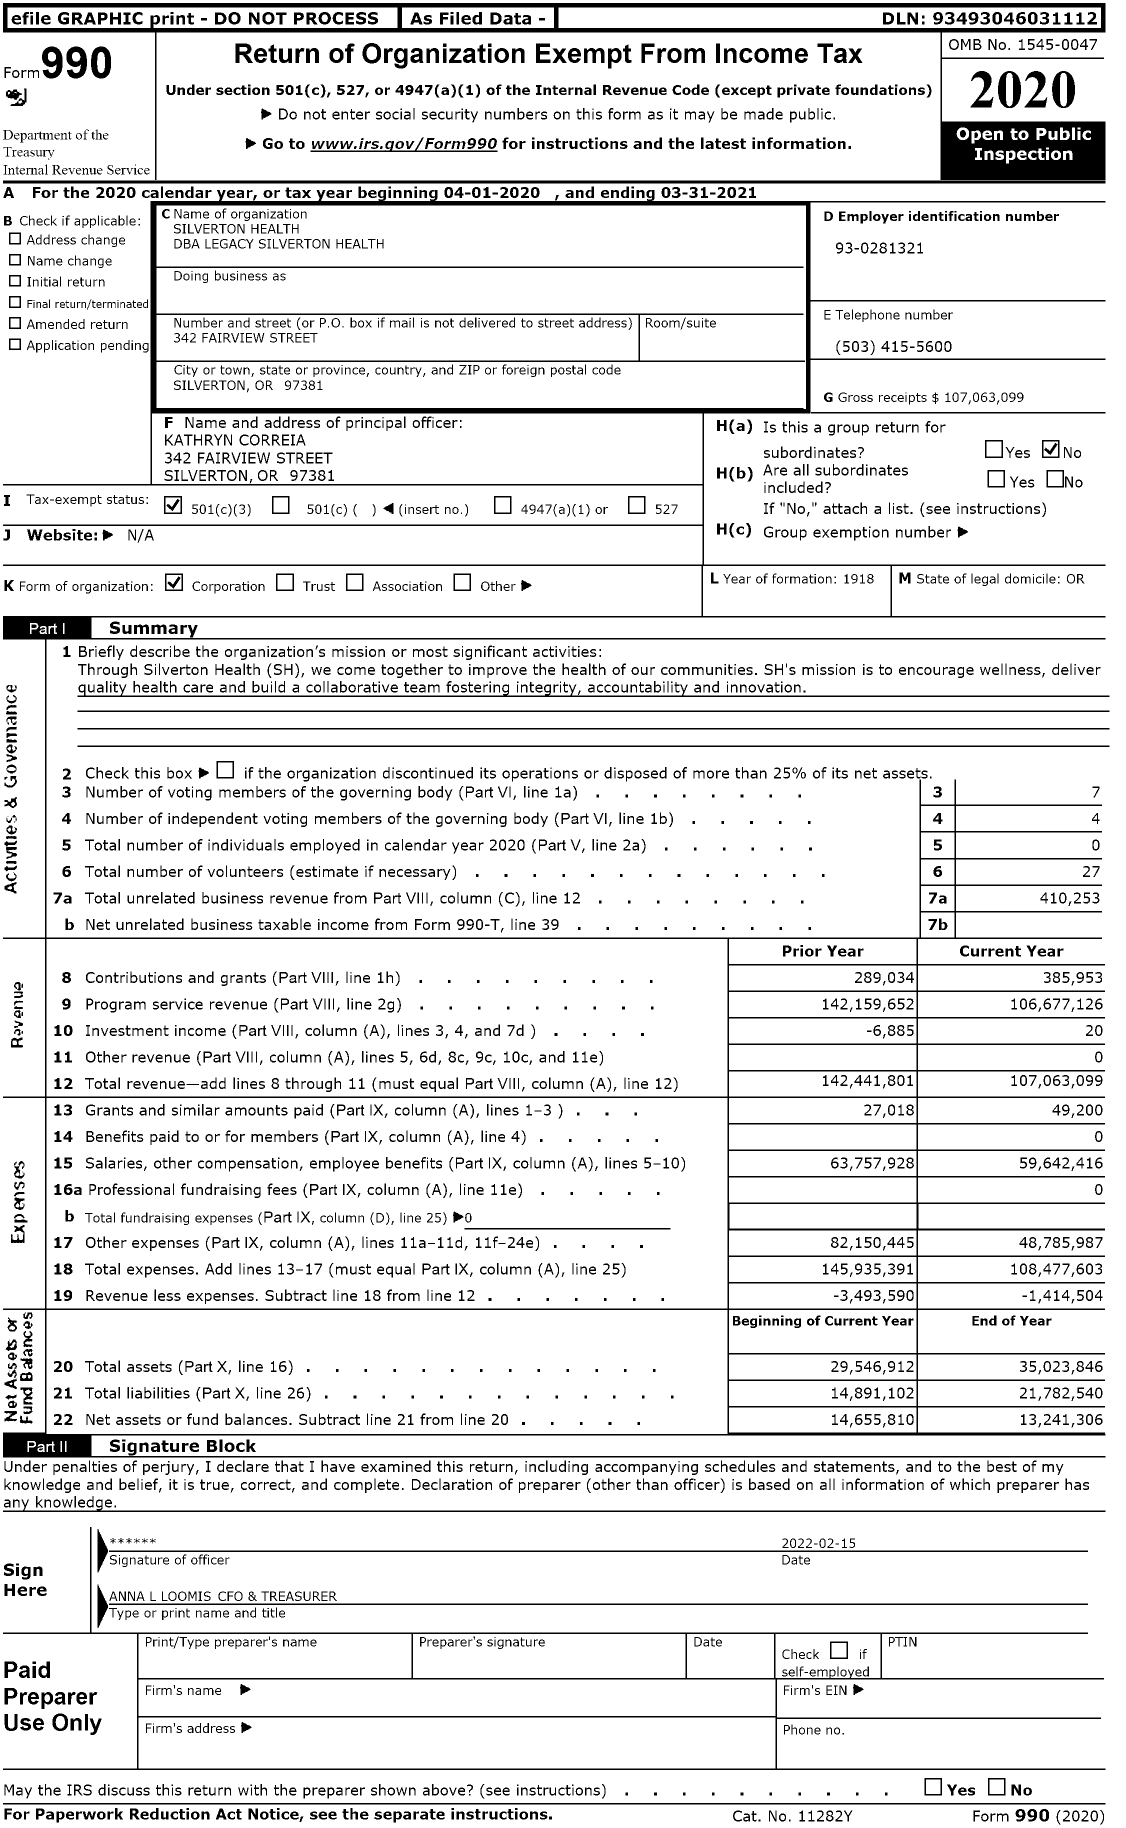 Image of first page of 2020 Form 990 for Legacy Silverton Health